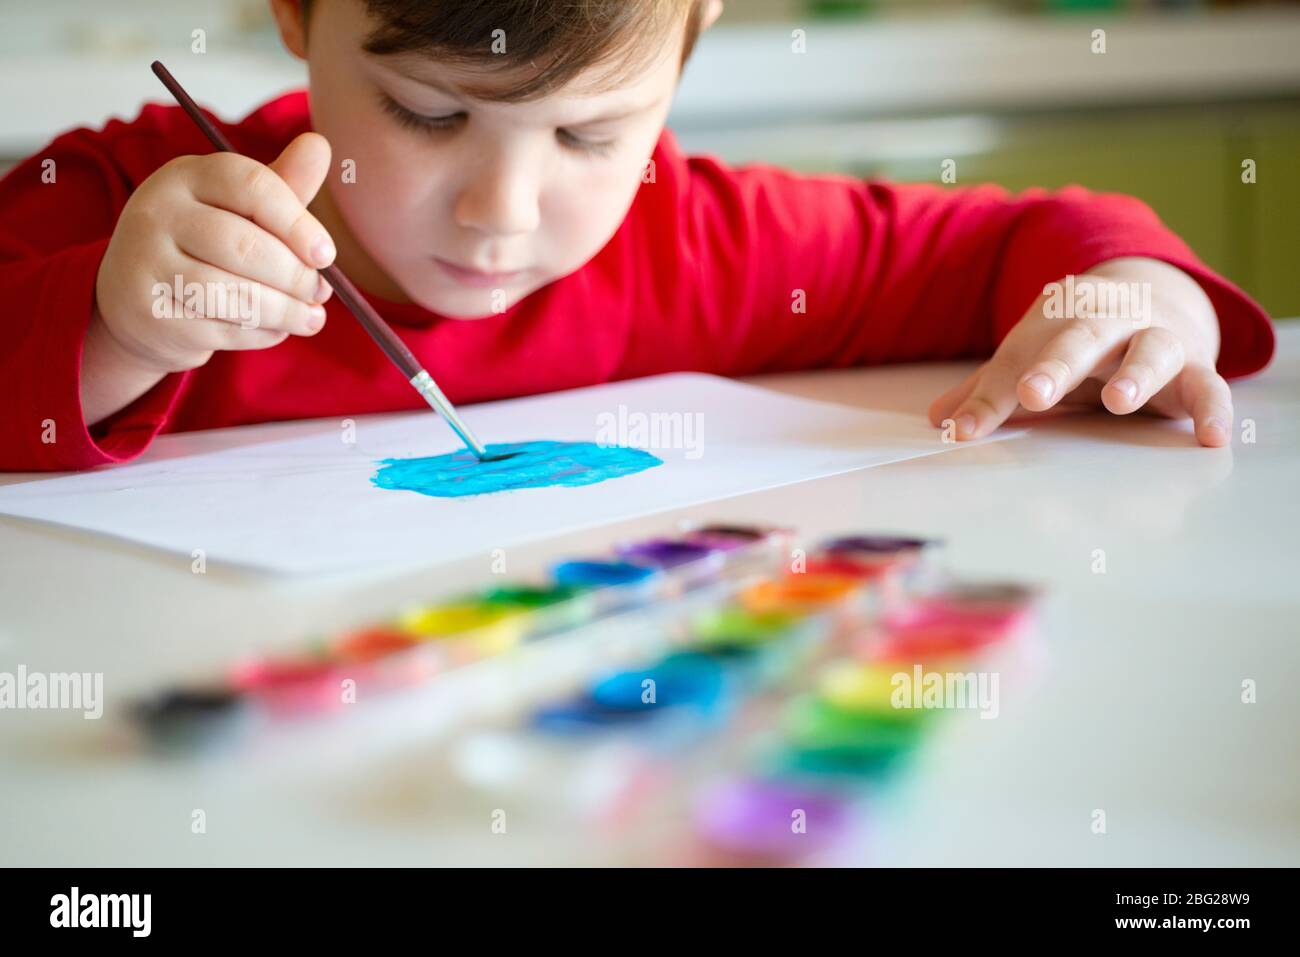 Boy Learns to Paint with a Brush on Paper Sitting at a Table Stock Photo